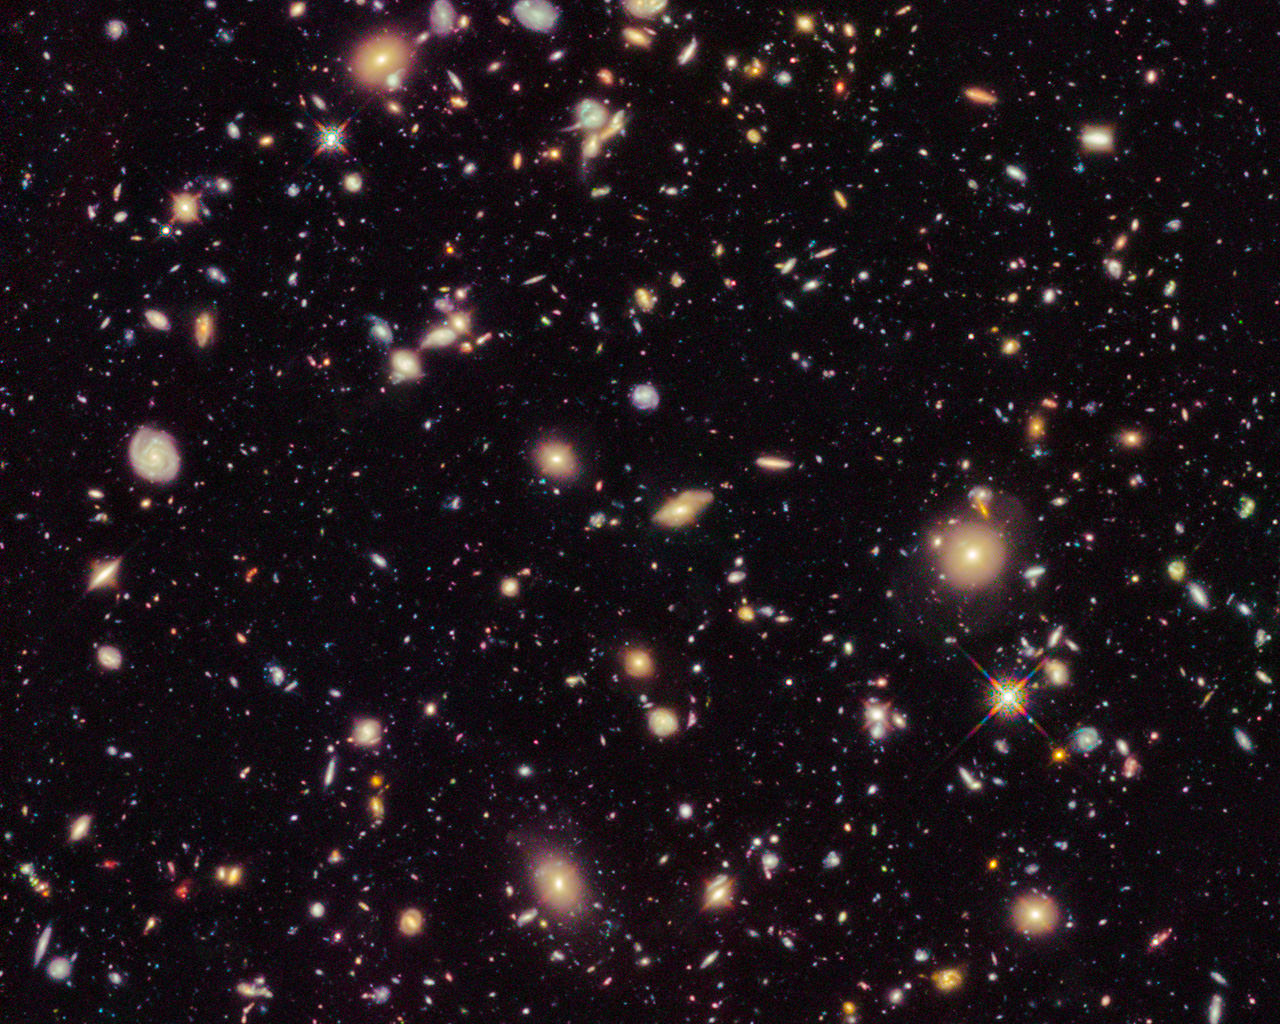 This image shows the Hubble Ultra Deep Field 2012, an improved version of the Hubble Ultra Deep Field image featuring additional observation time. The new data have revealed for the first time a population of distant galaxies at redshifts between 9 and 12, including the most distant object observed to date. These galaxies will require confirmation using spectroscopy by the forthcoming NASA/ESA/CSA James Webb Space Telescope before they are considered to be fully confirmed.